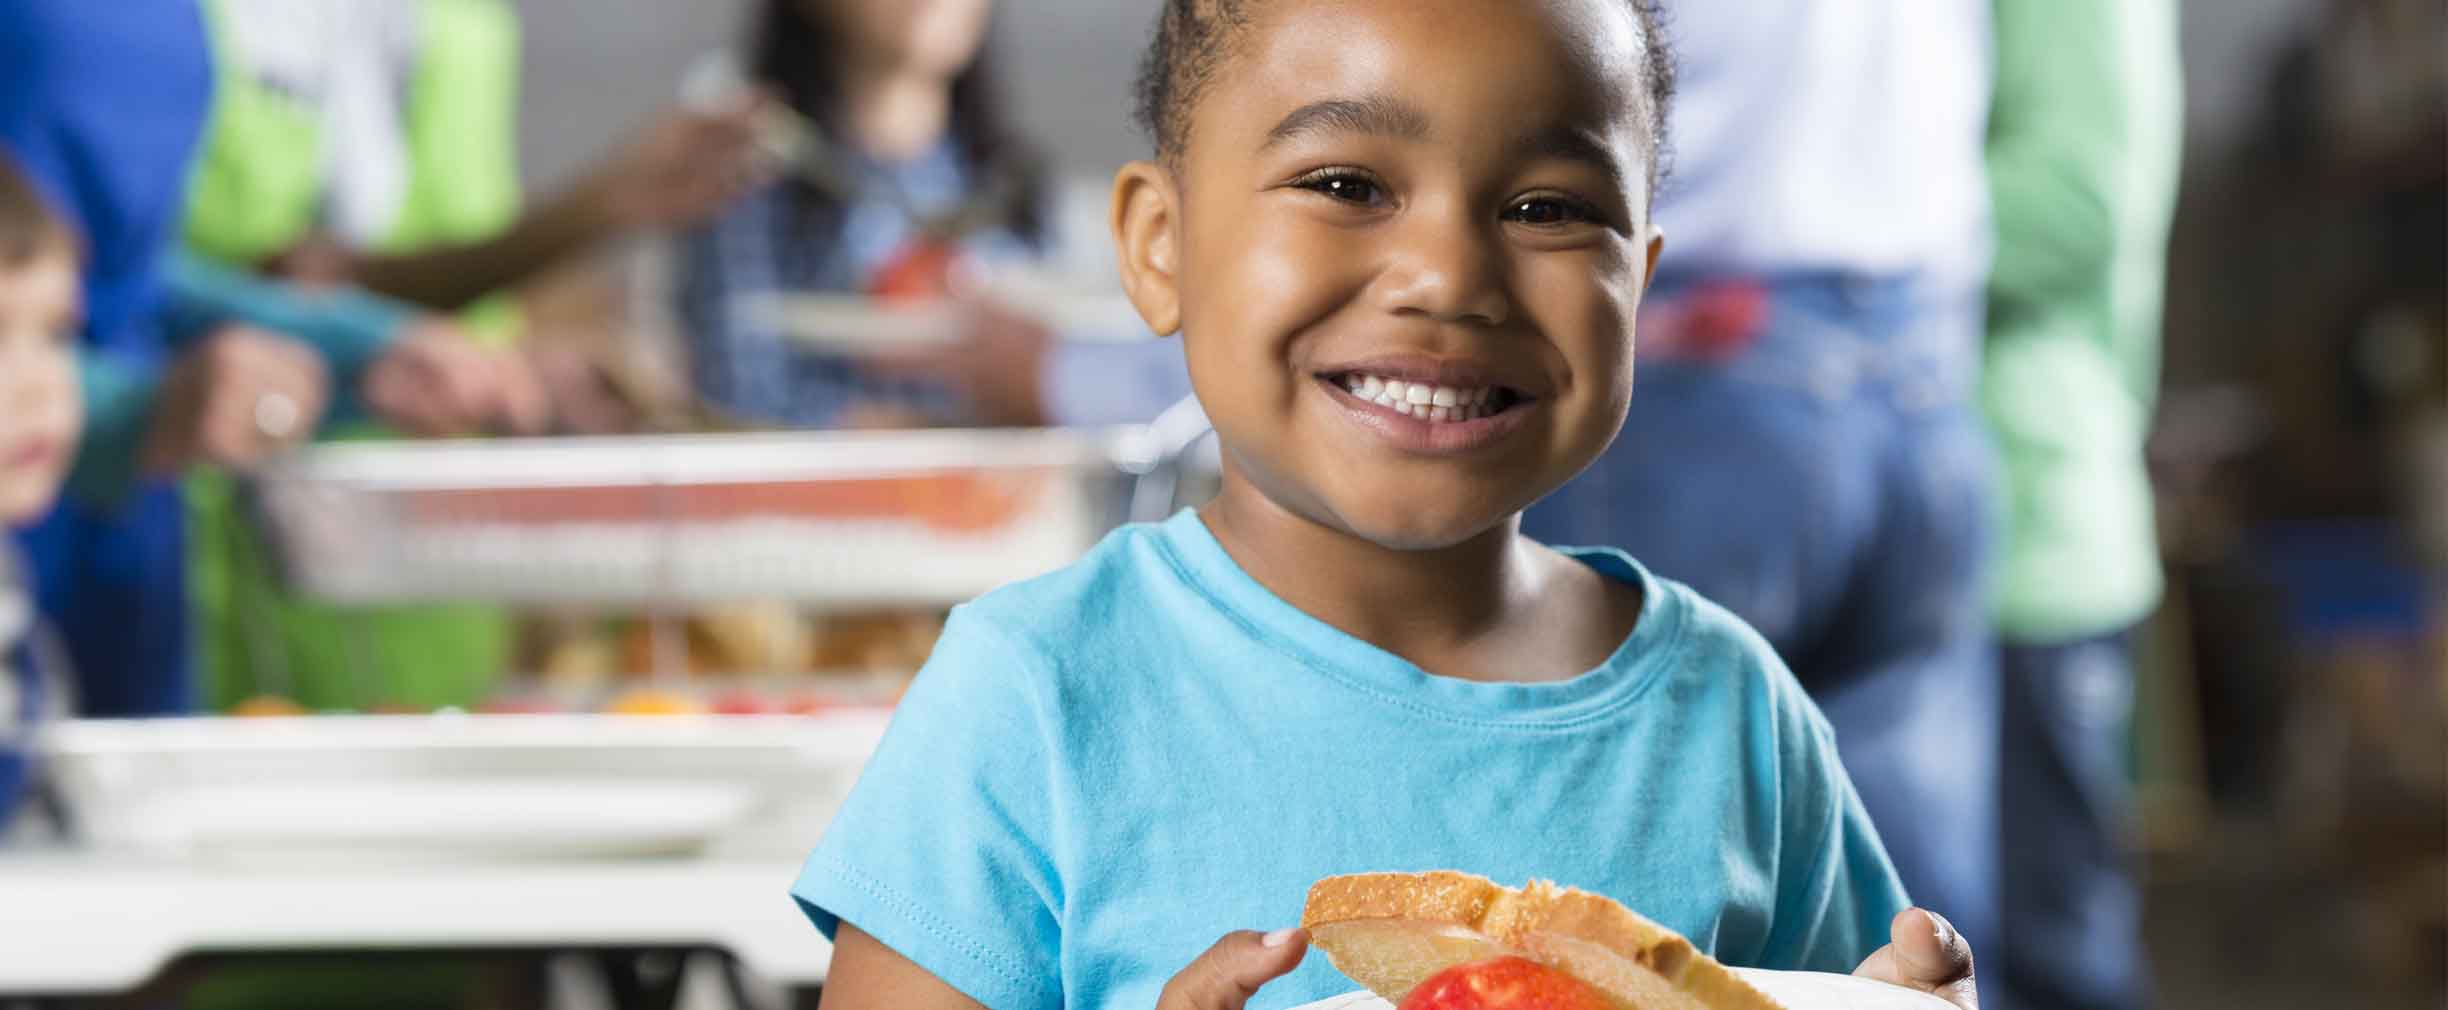 little girl smiling and holding bowl of food at food bank